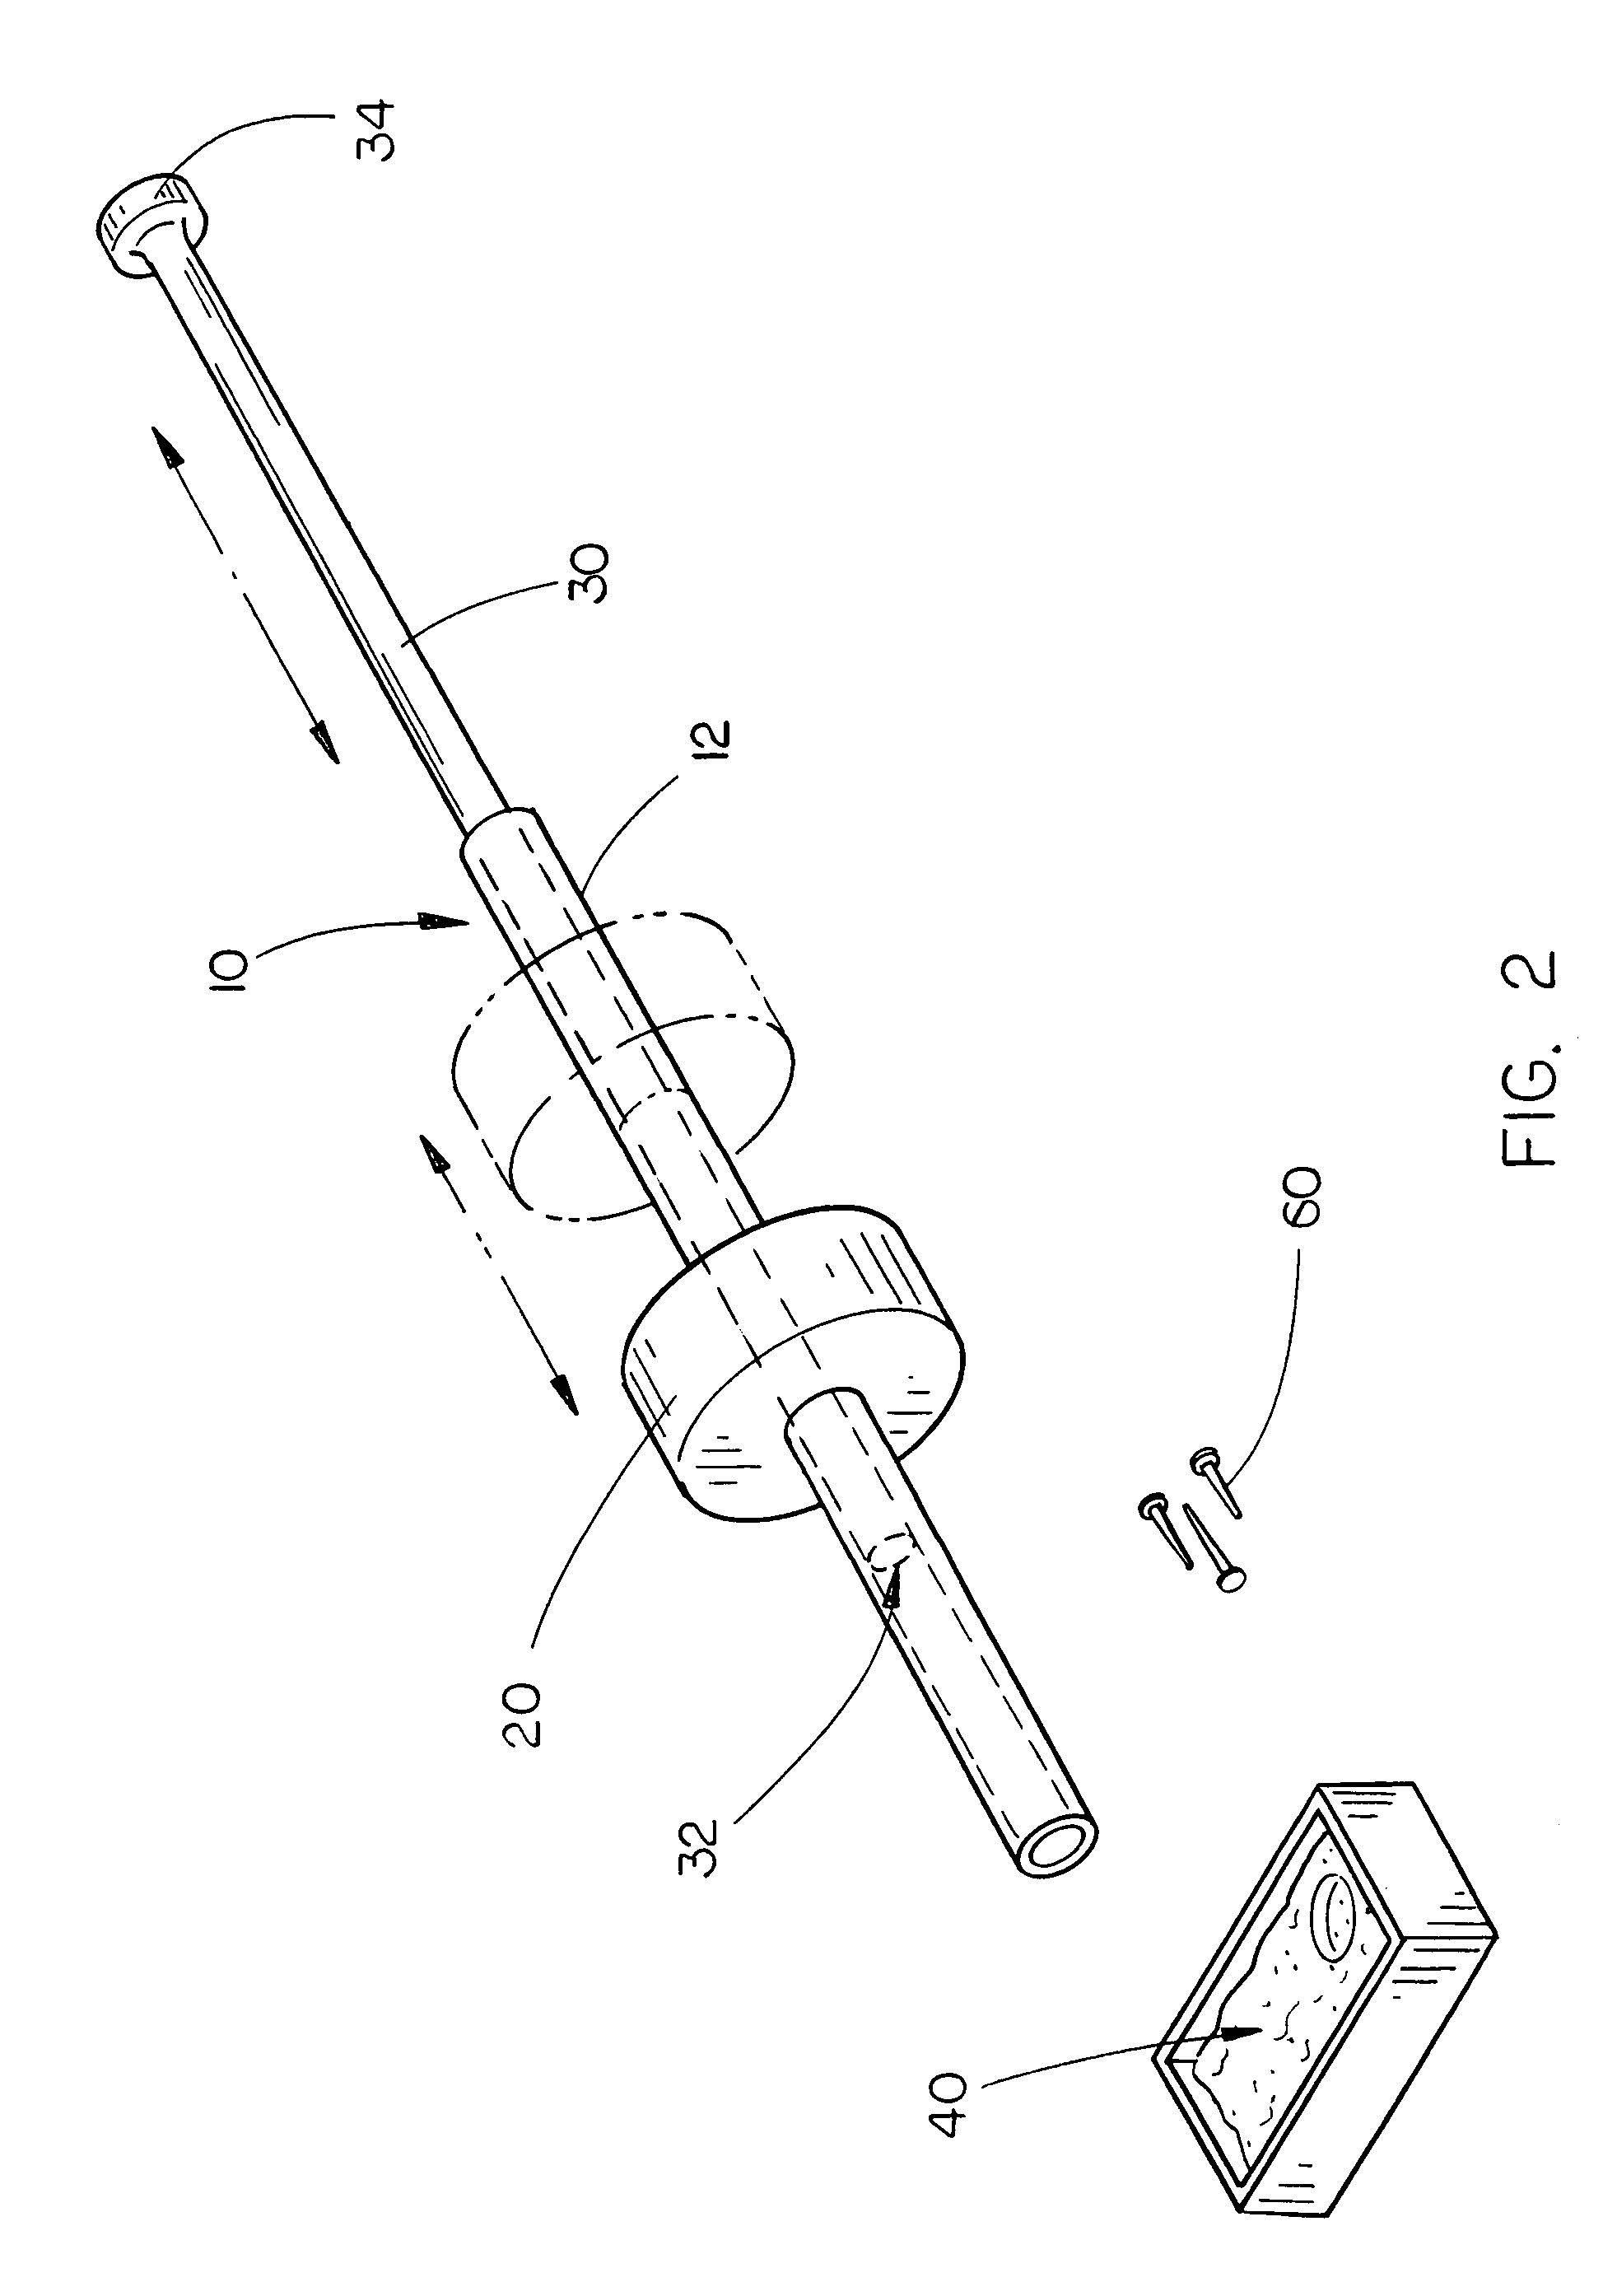 Nail holding and driving device